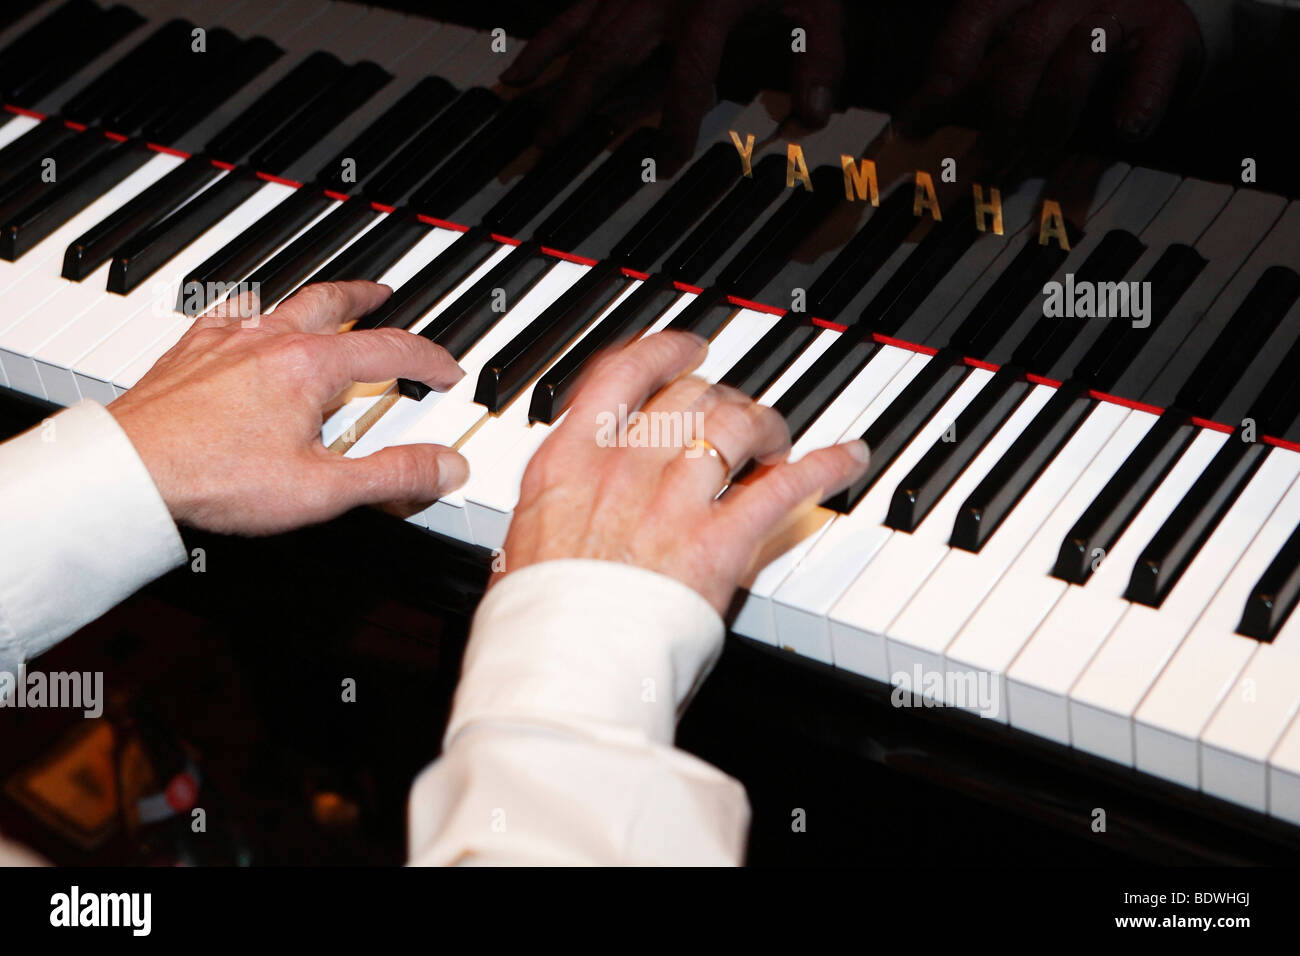 Hands playing the piano Stock Photo